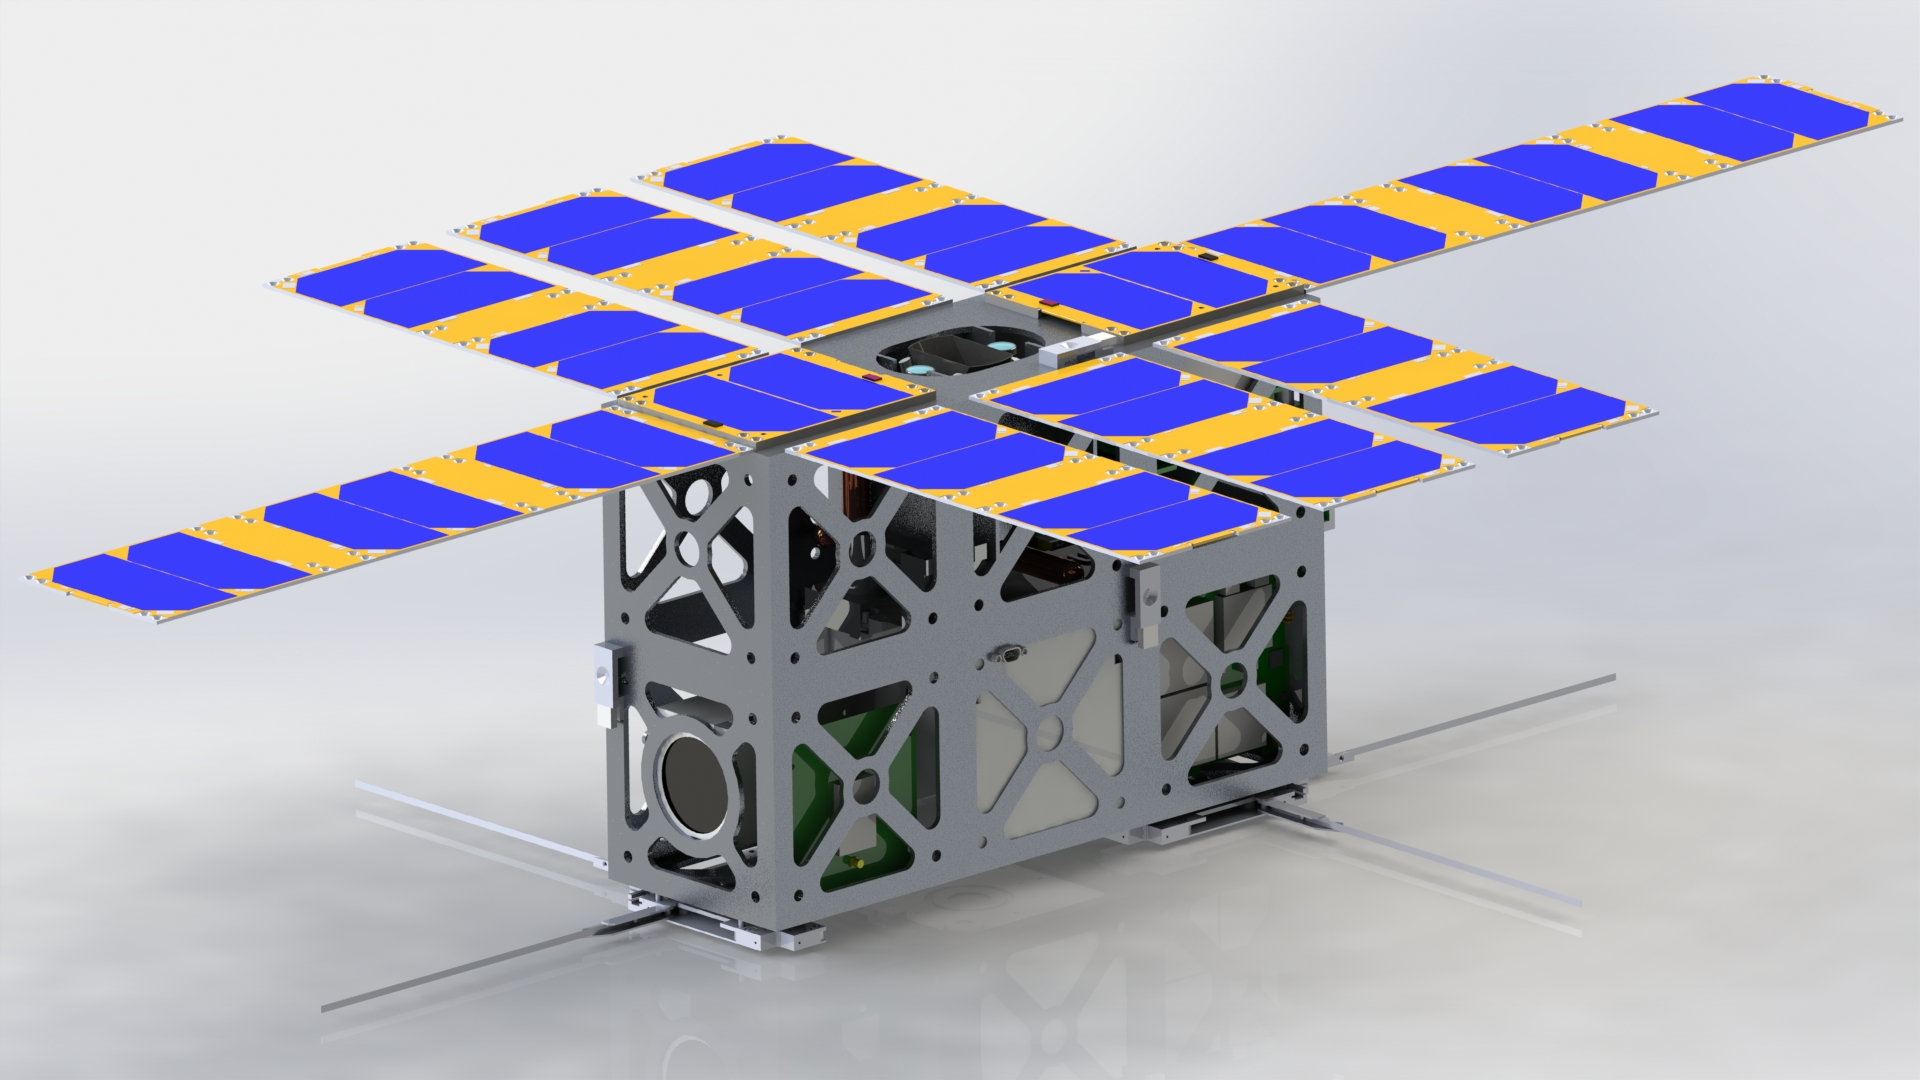 Example CubeSat Used for Analysis, Interfluo (n.d.)